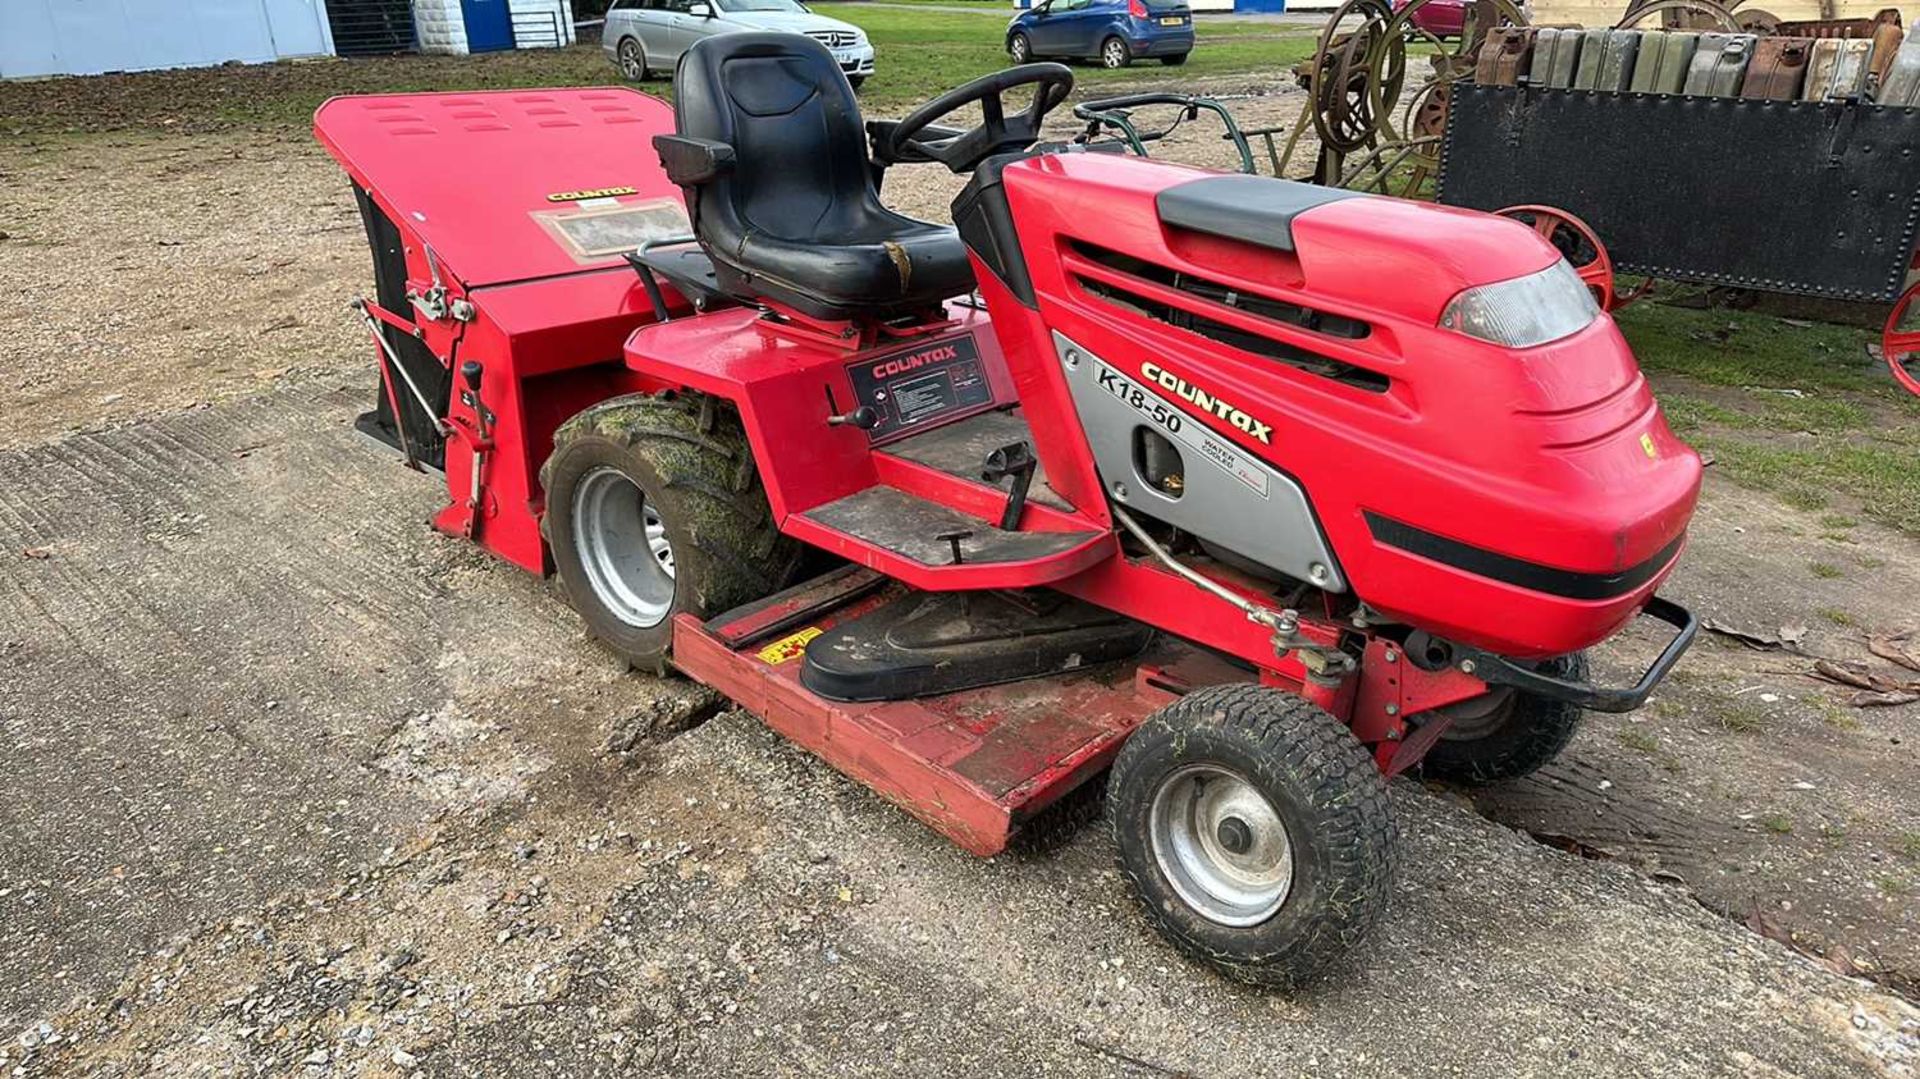 Countax K18-50 Garden Tractor / ride-on Mower, complete with collection box - Image 3 of 10